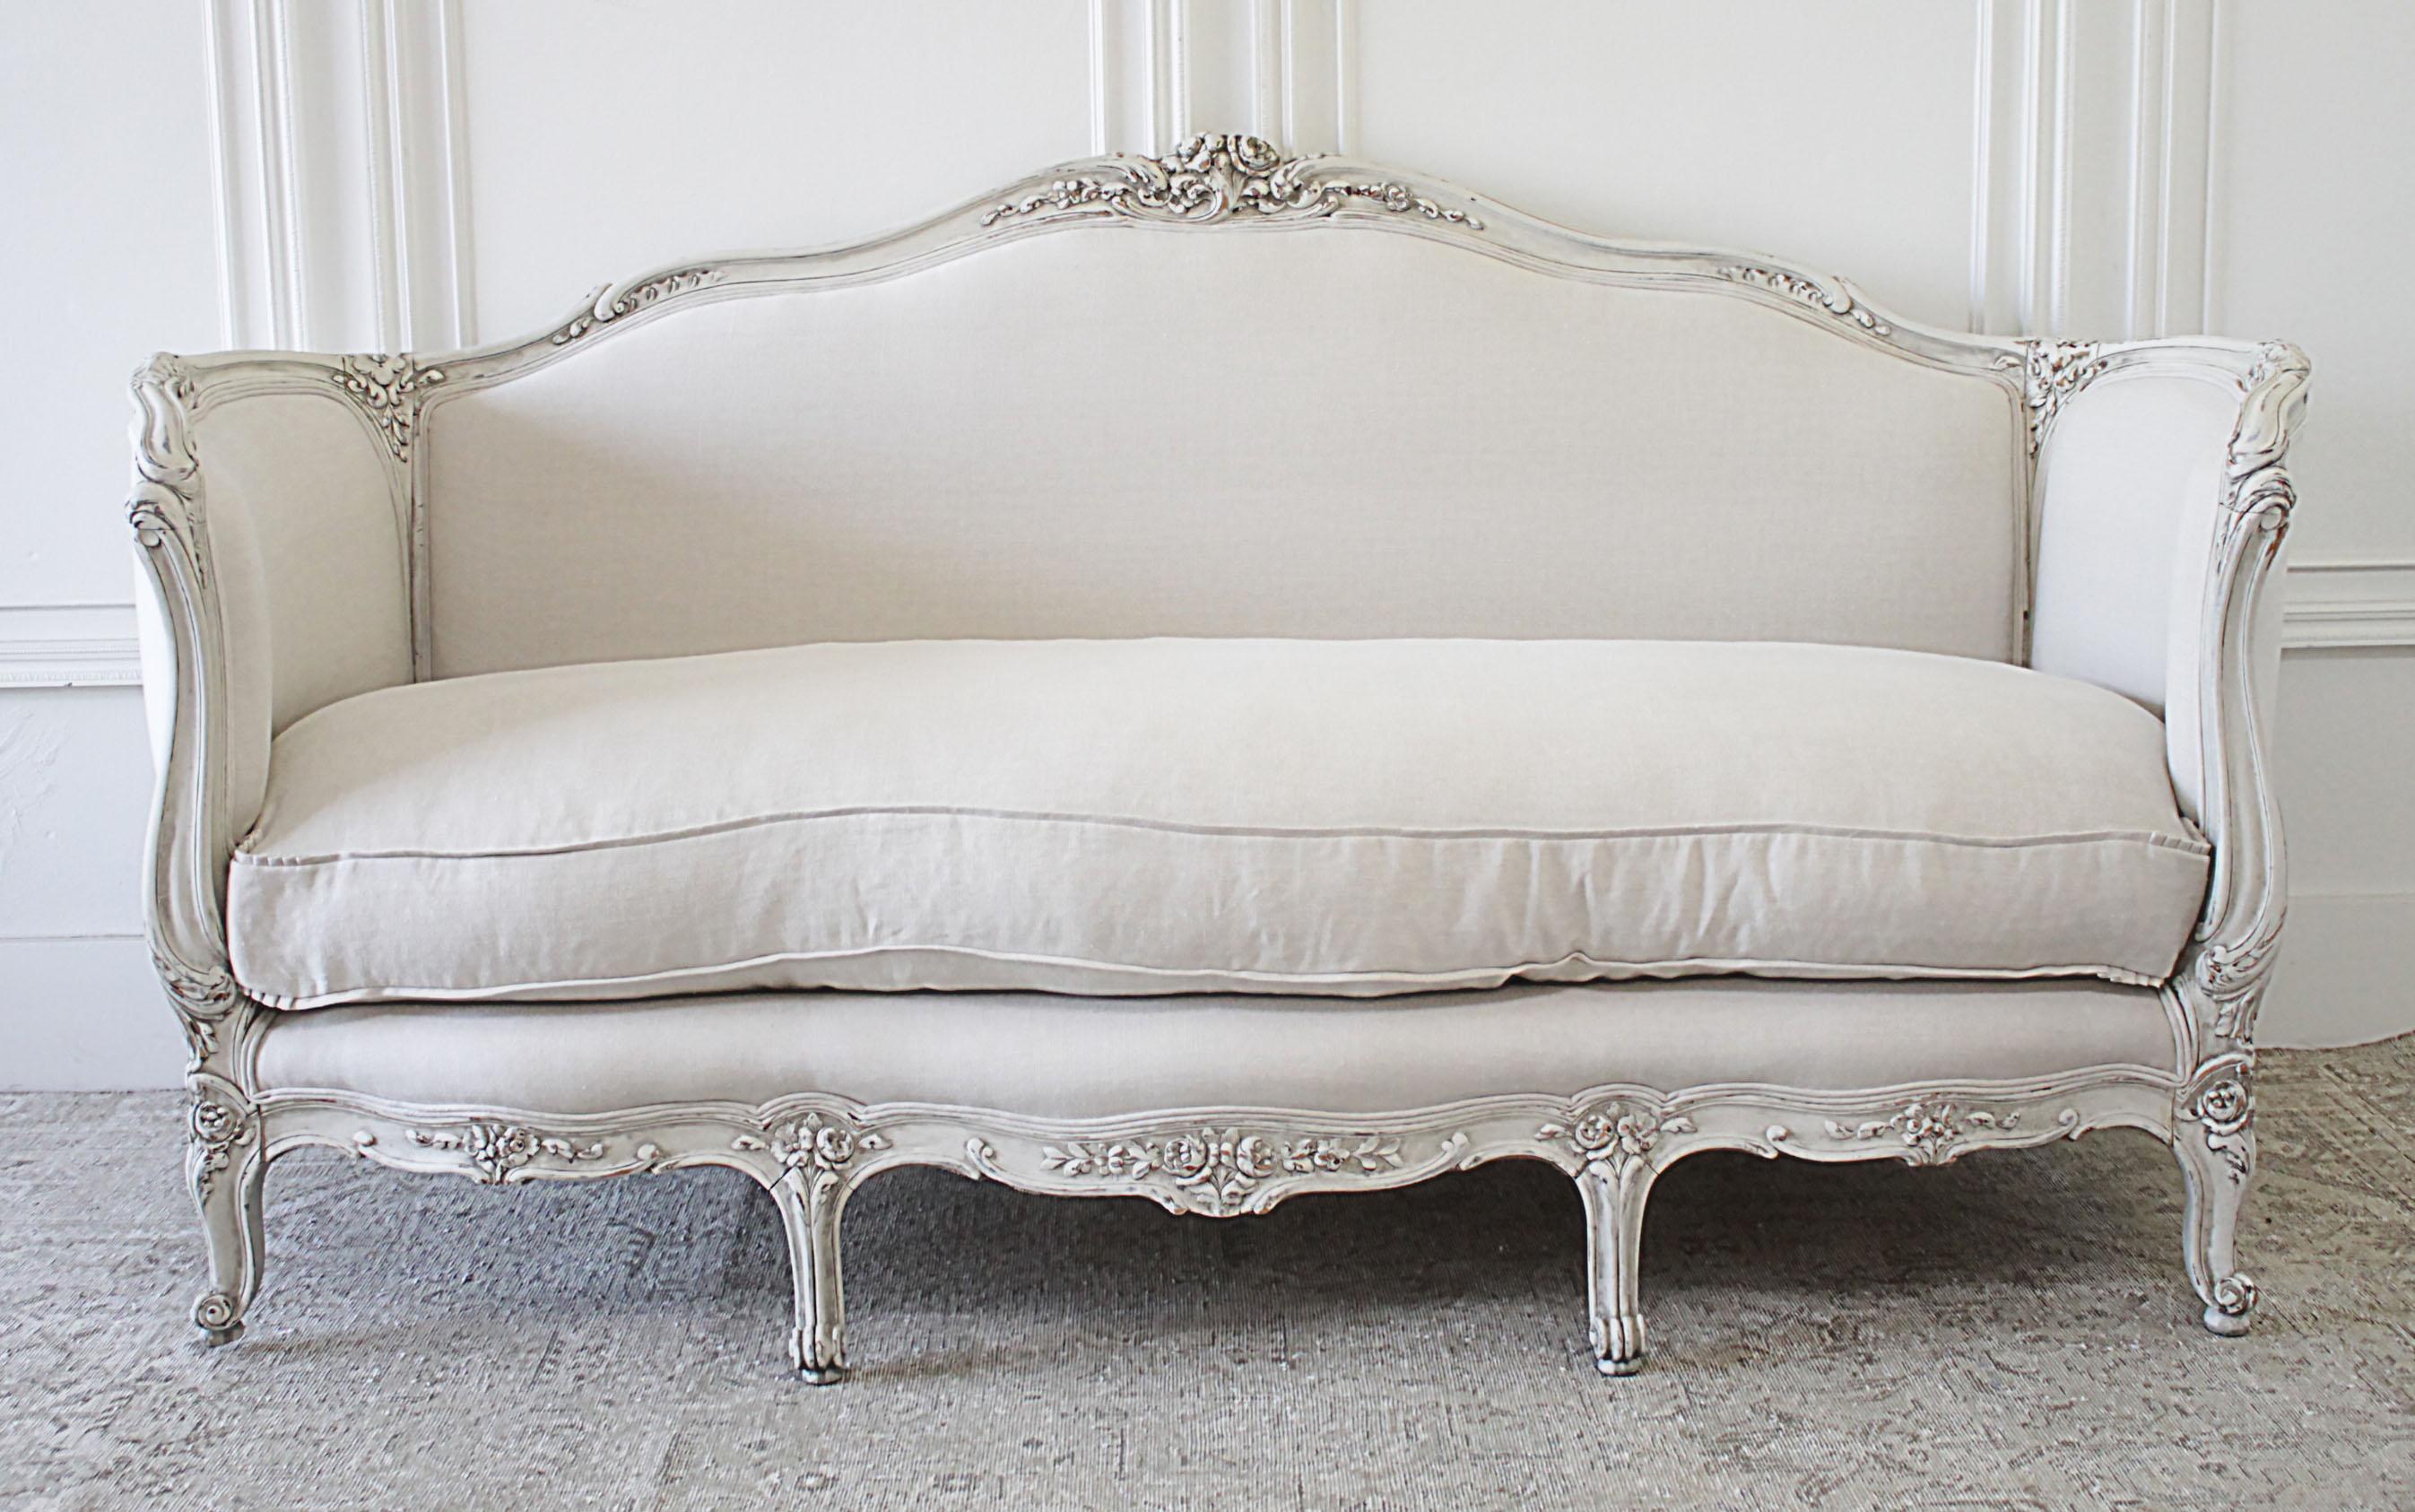 Antique Louis XV Style Painted and Upholstered French Sofa in Belgian Linen
This sofa has been painted in a soft oyster white finish, with subtle distressed edges, and antique patina.  Beautiful large carved roses,  curved side arms,  and large down